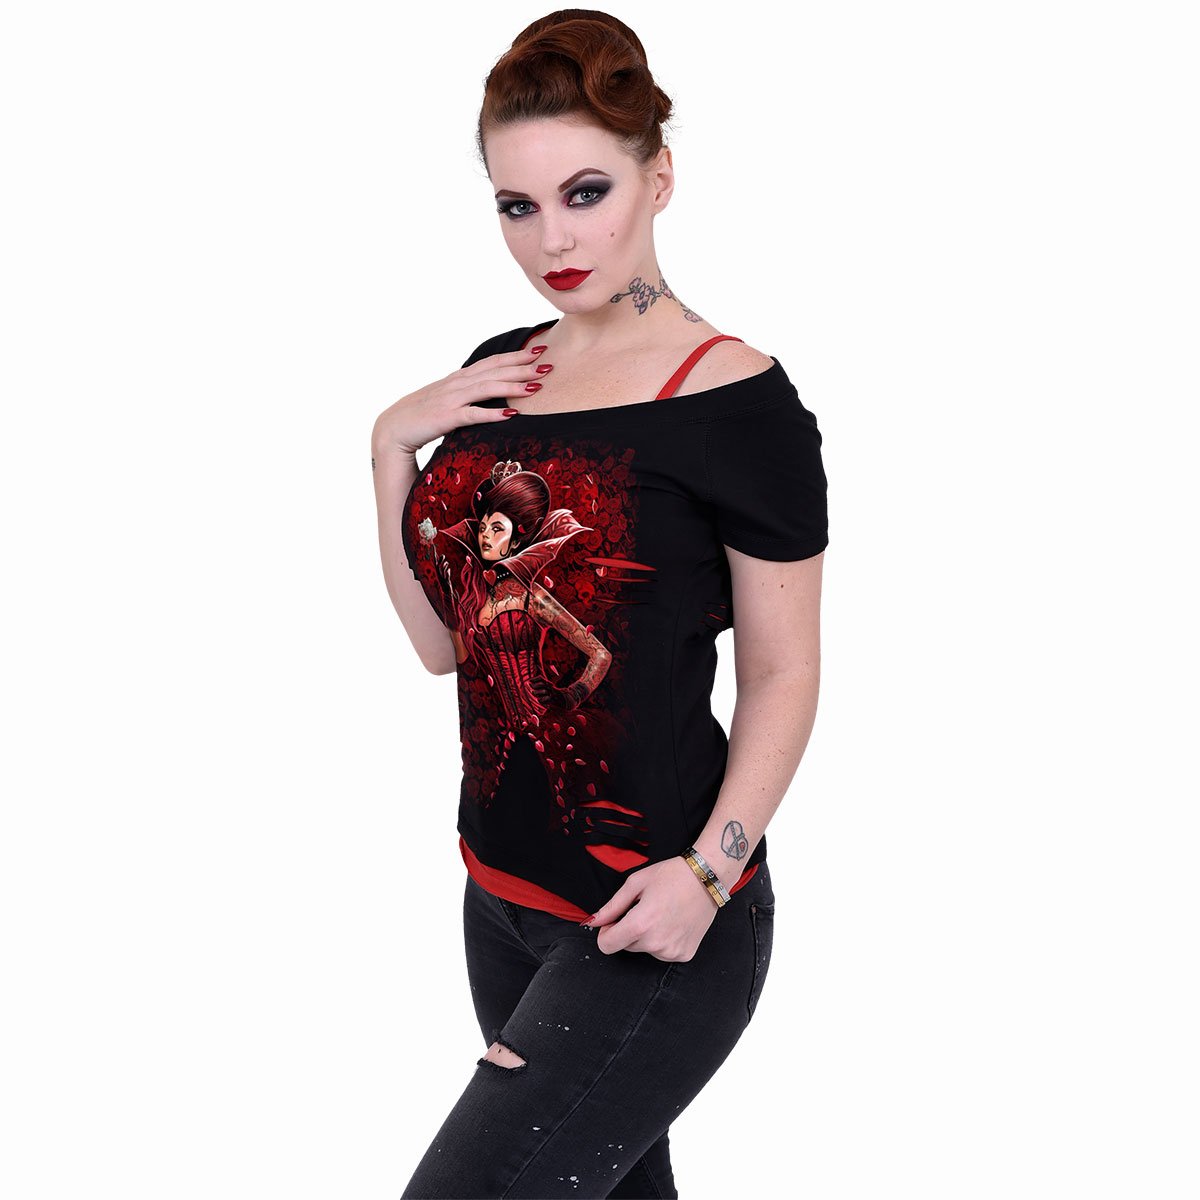 Spiral direct queen of hearts 2 in 1 red ripped top black new with tags